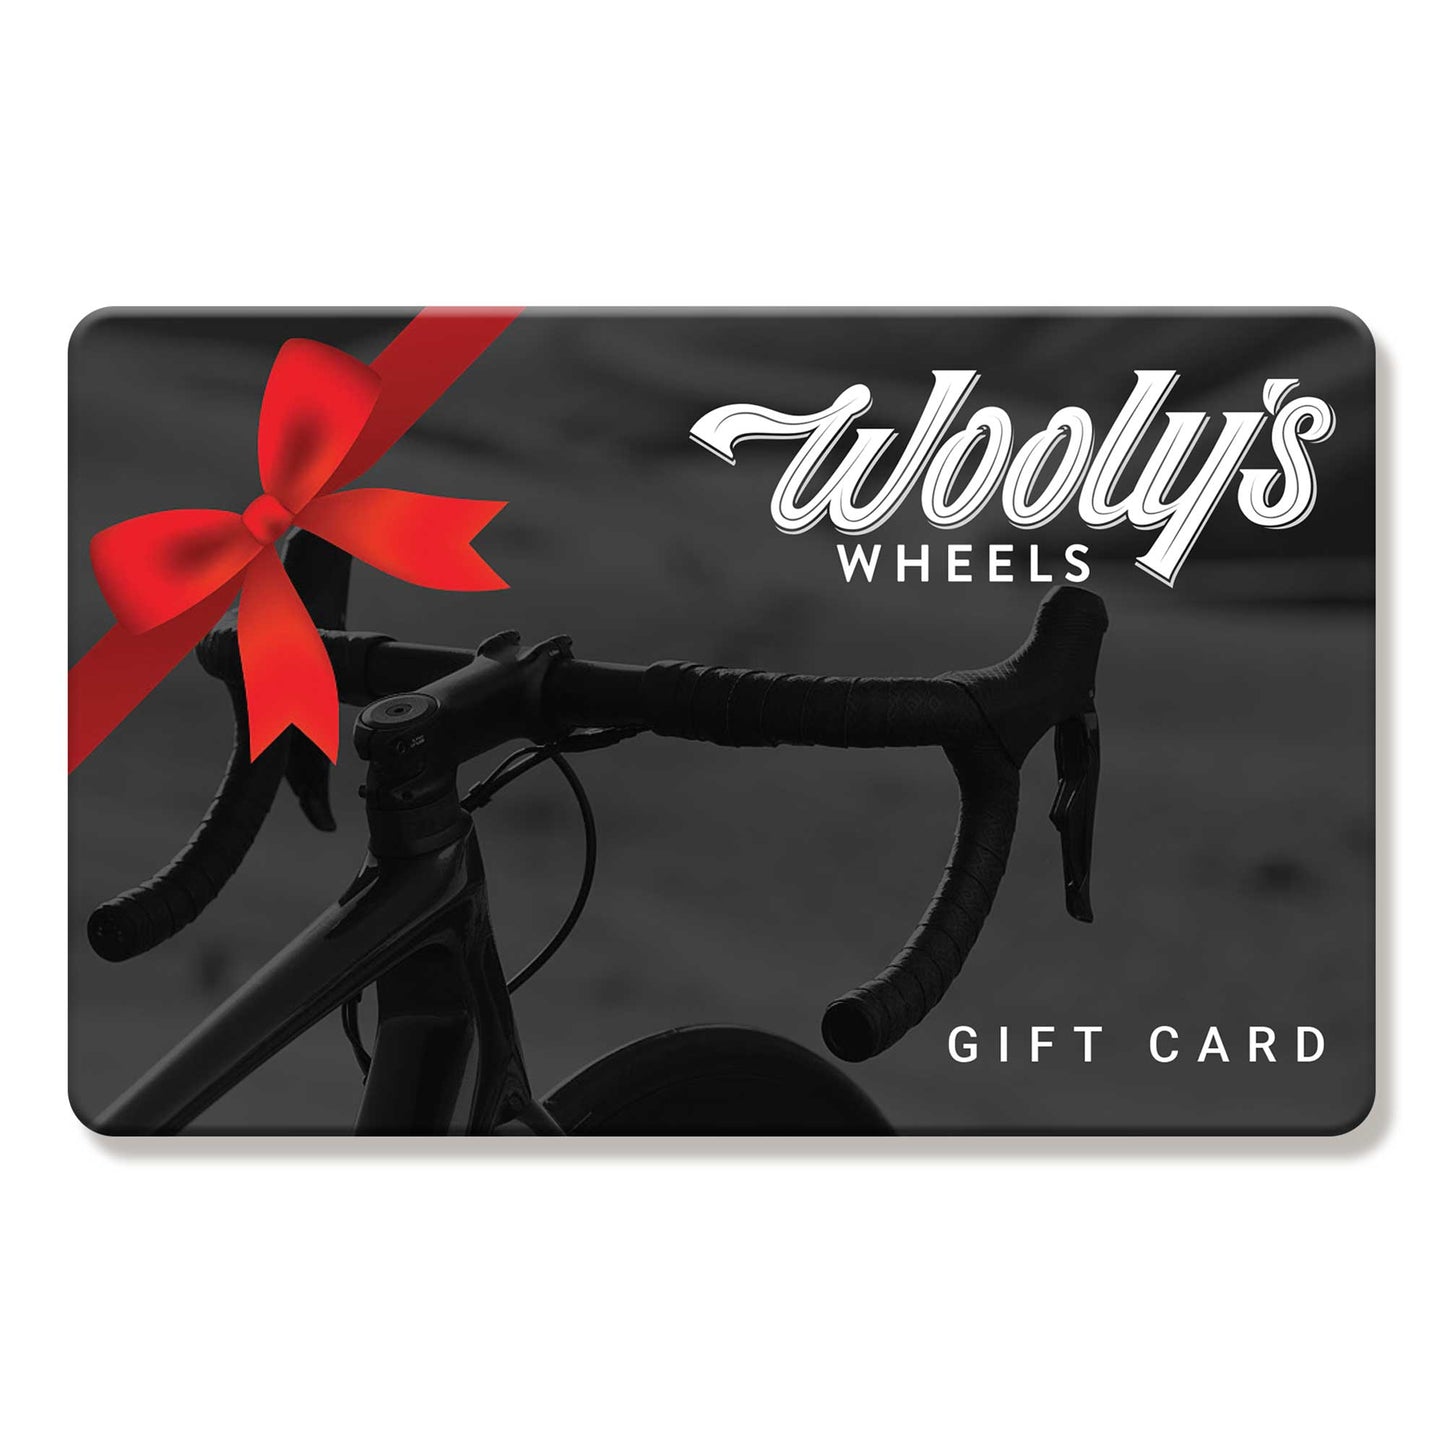 $500.00 Gift Card (online use only)